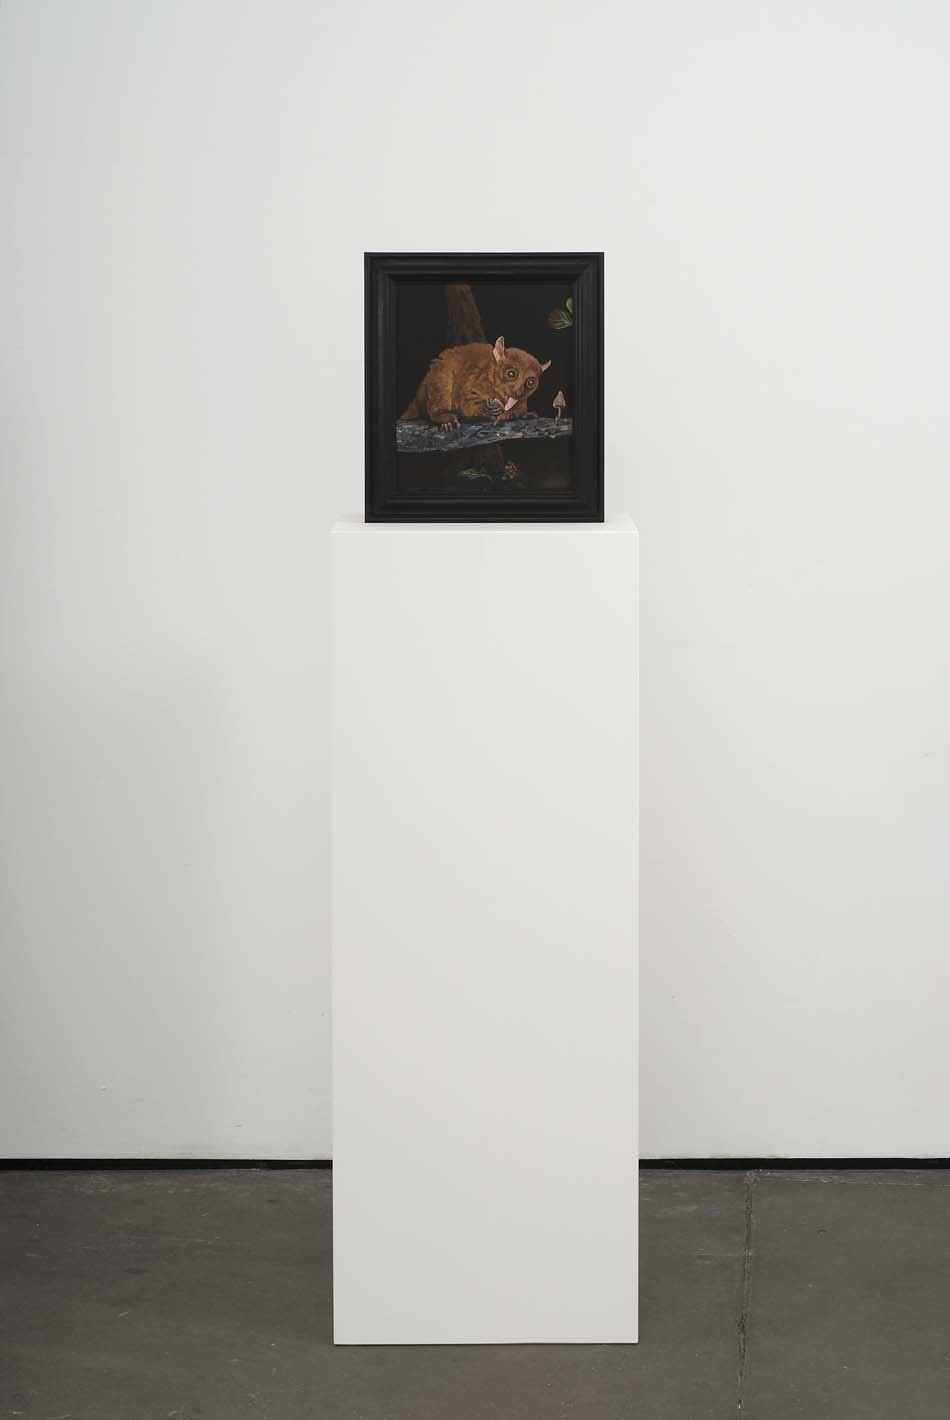     Curiosity Killed the Prosimian 2009 Double-sided acrylic on board in artists frame mounted on pedestal 147.3 x 40 x 28cm    